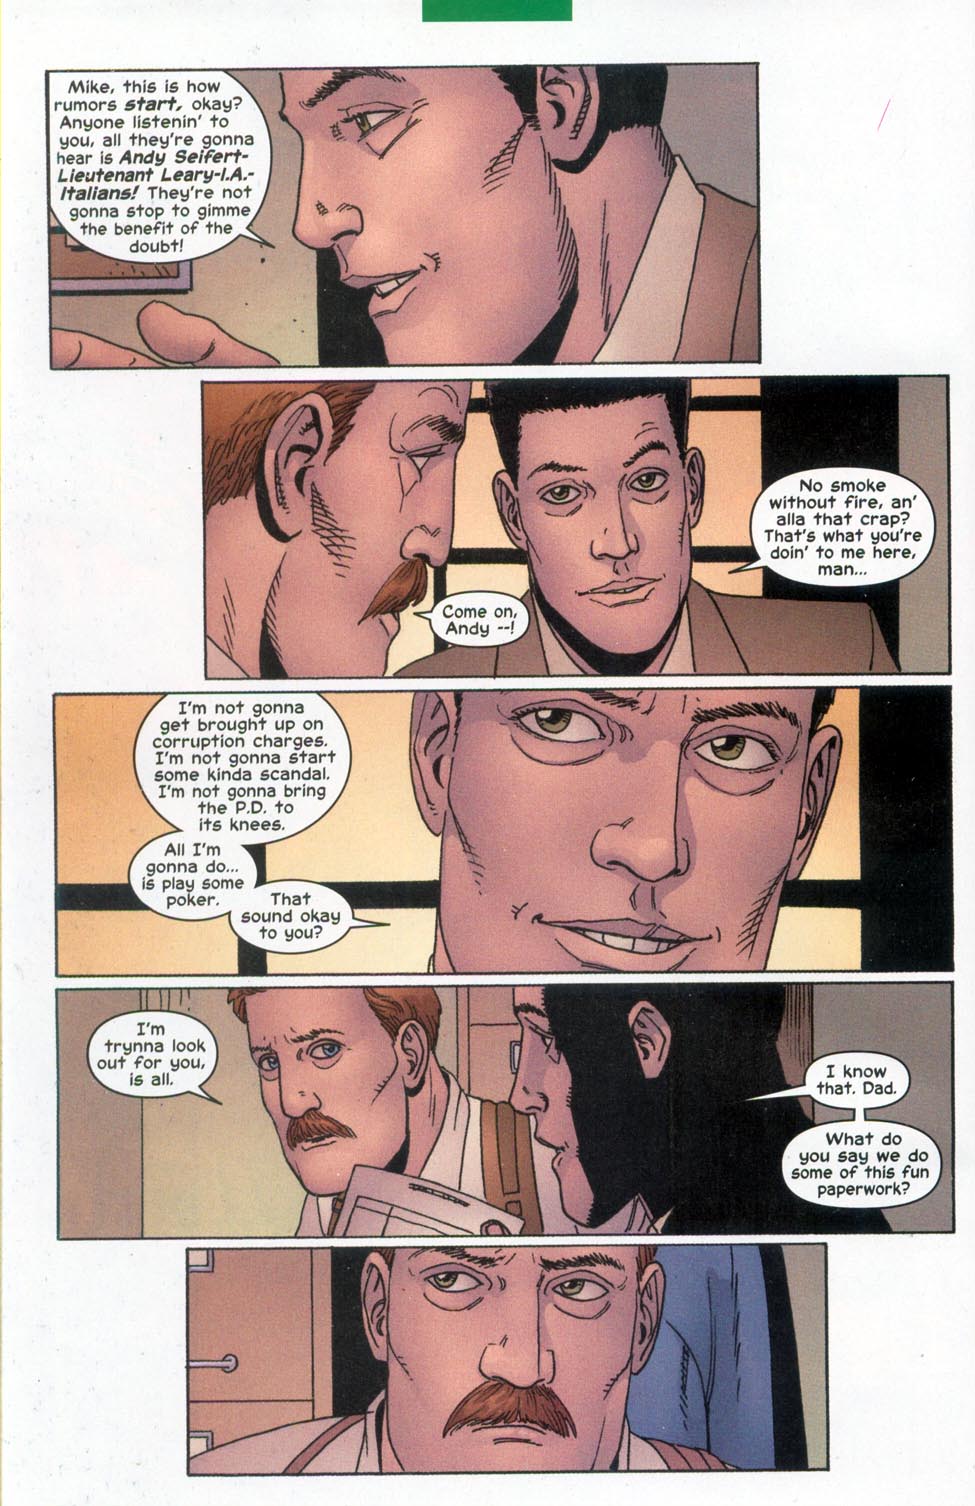 The Punisher (2001) issue 20 - Brotherhood #01 - Page 7